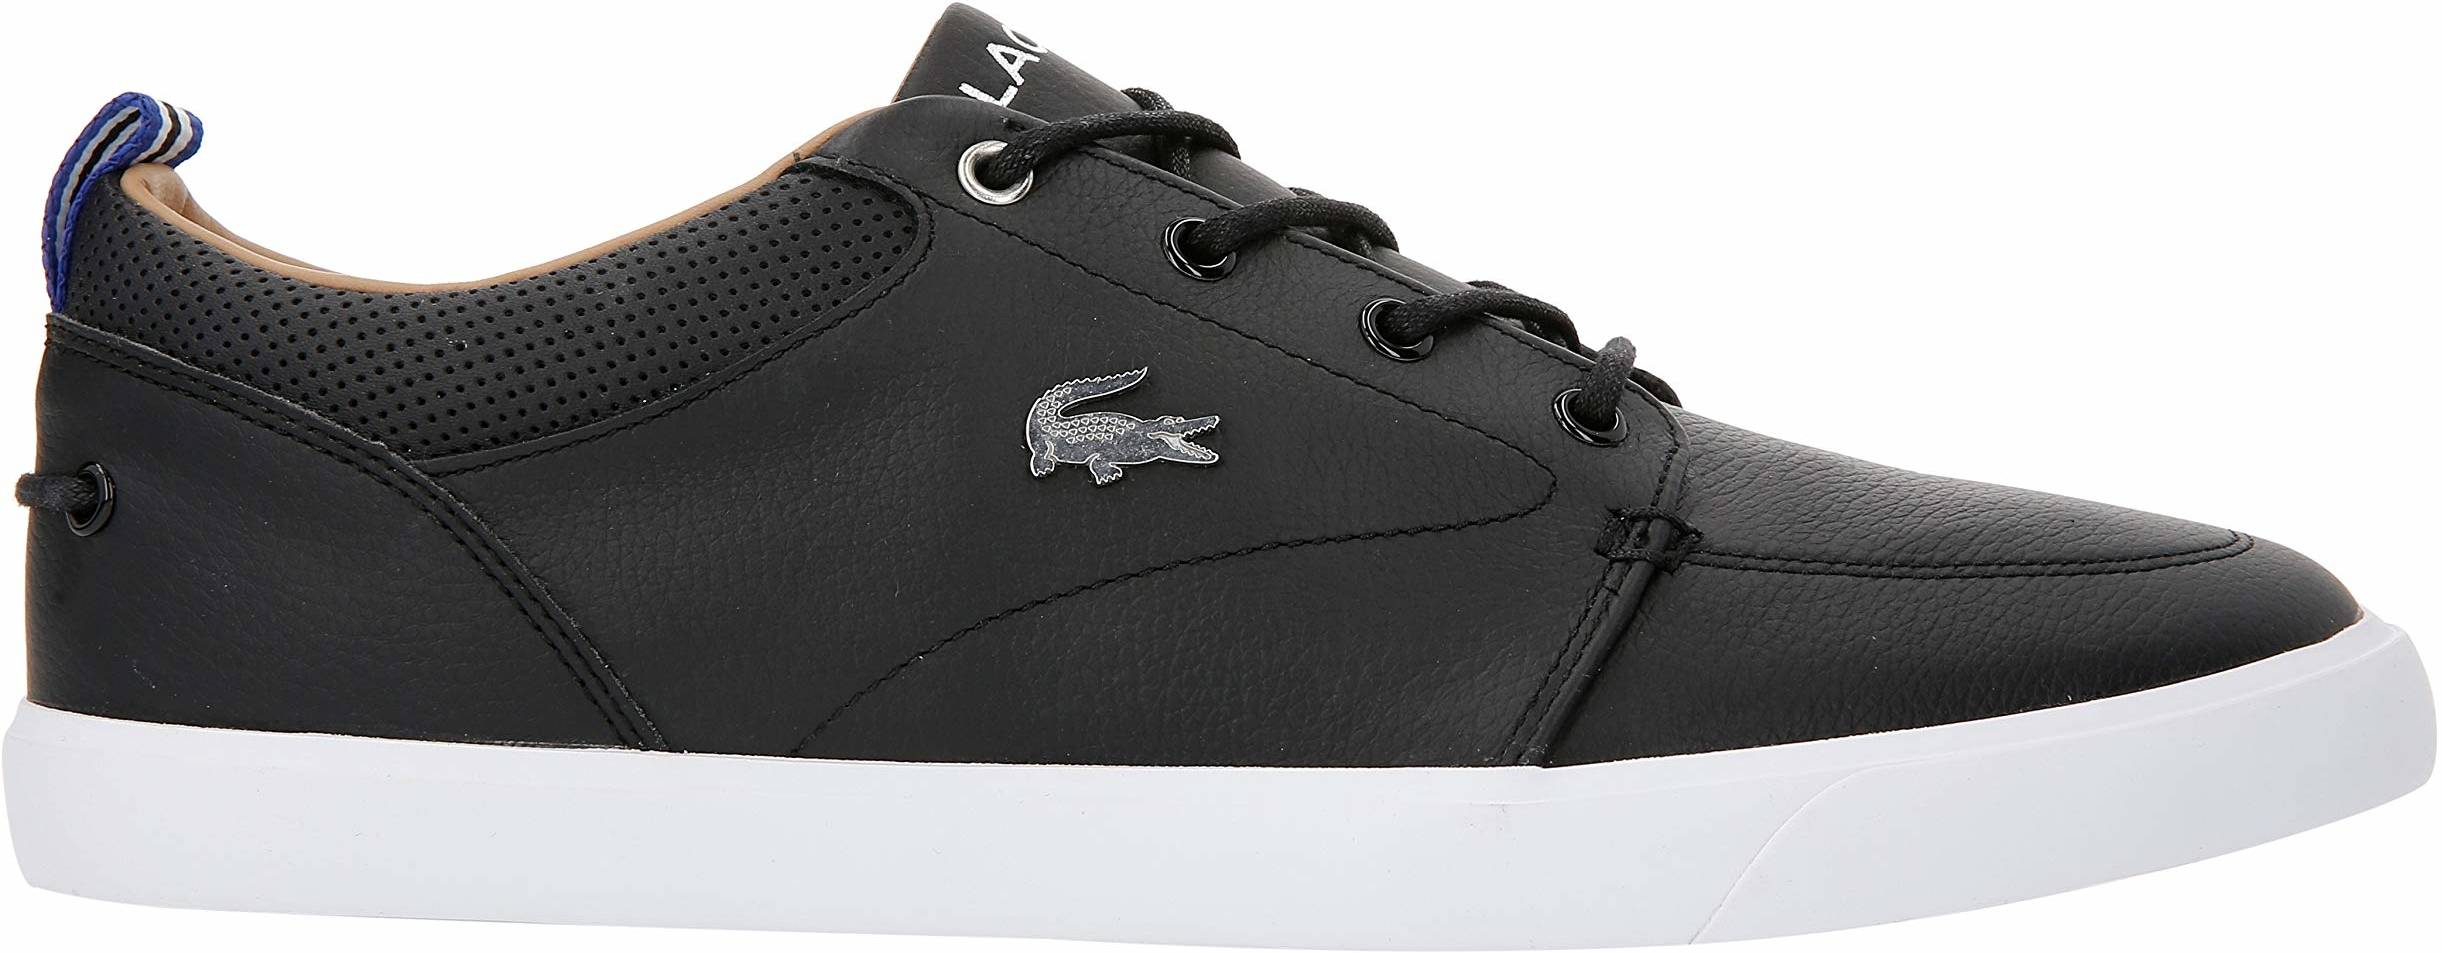 Lacoste Bayliss Sneaker sneakers in 9 colors (only $57) | RunRepeat